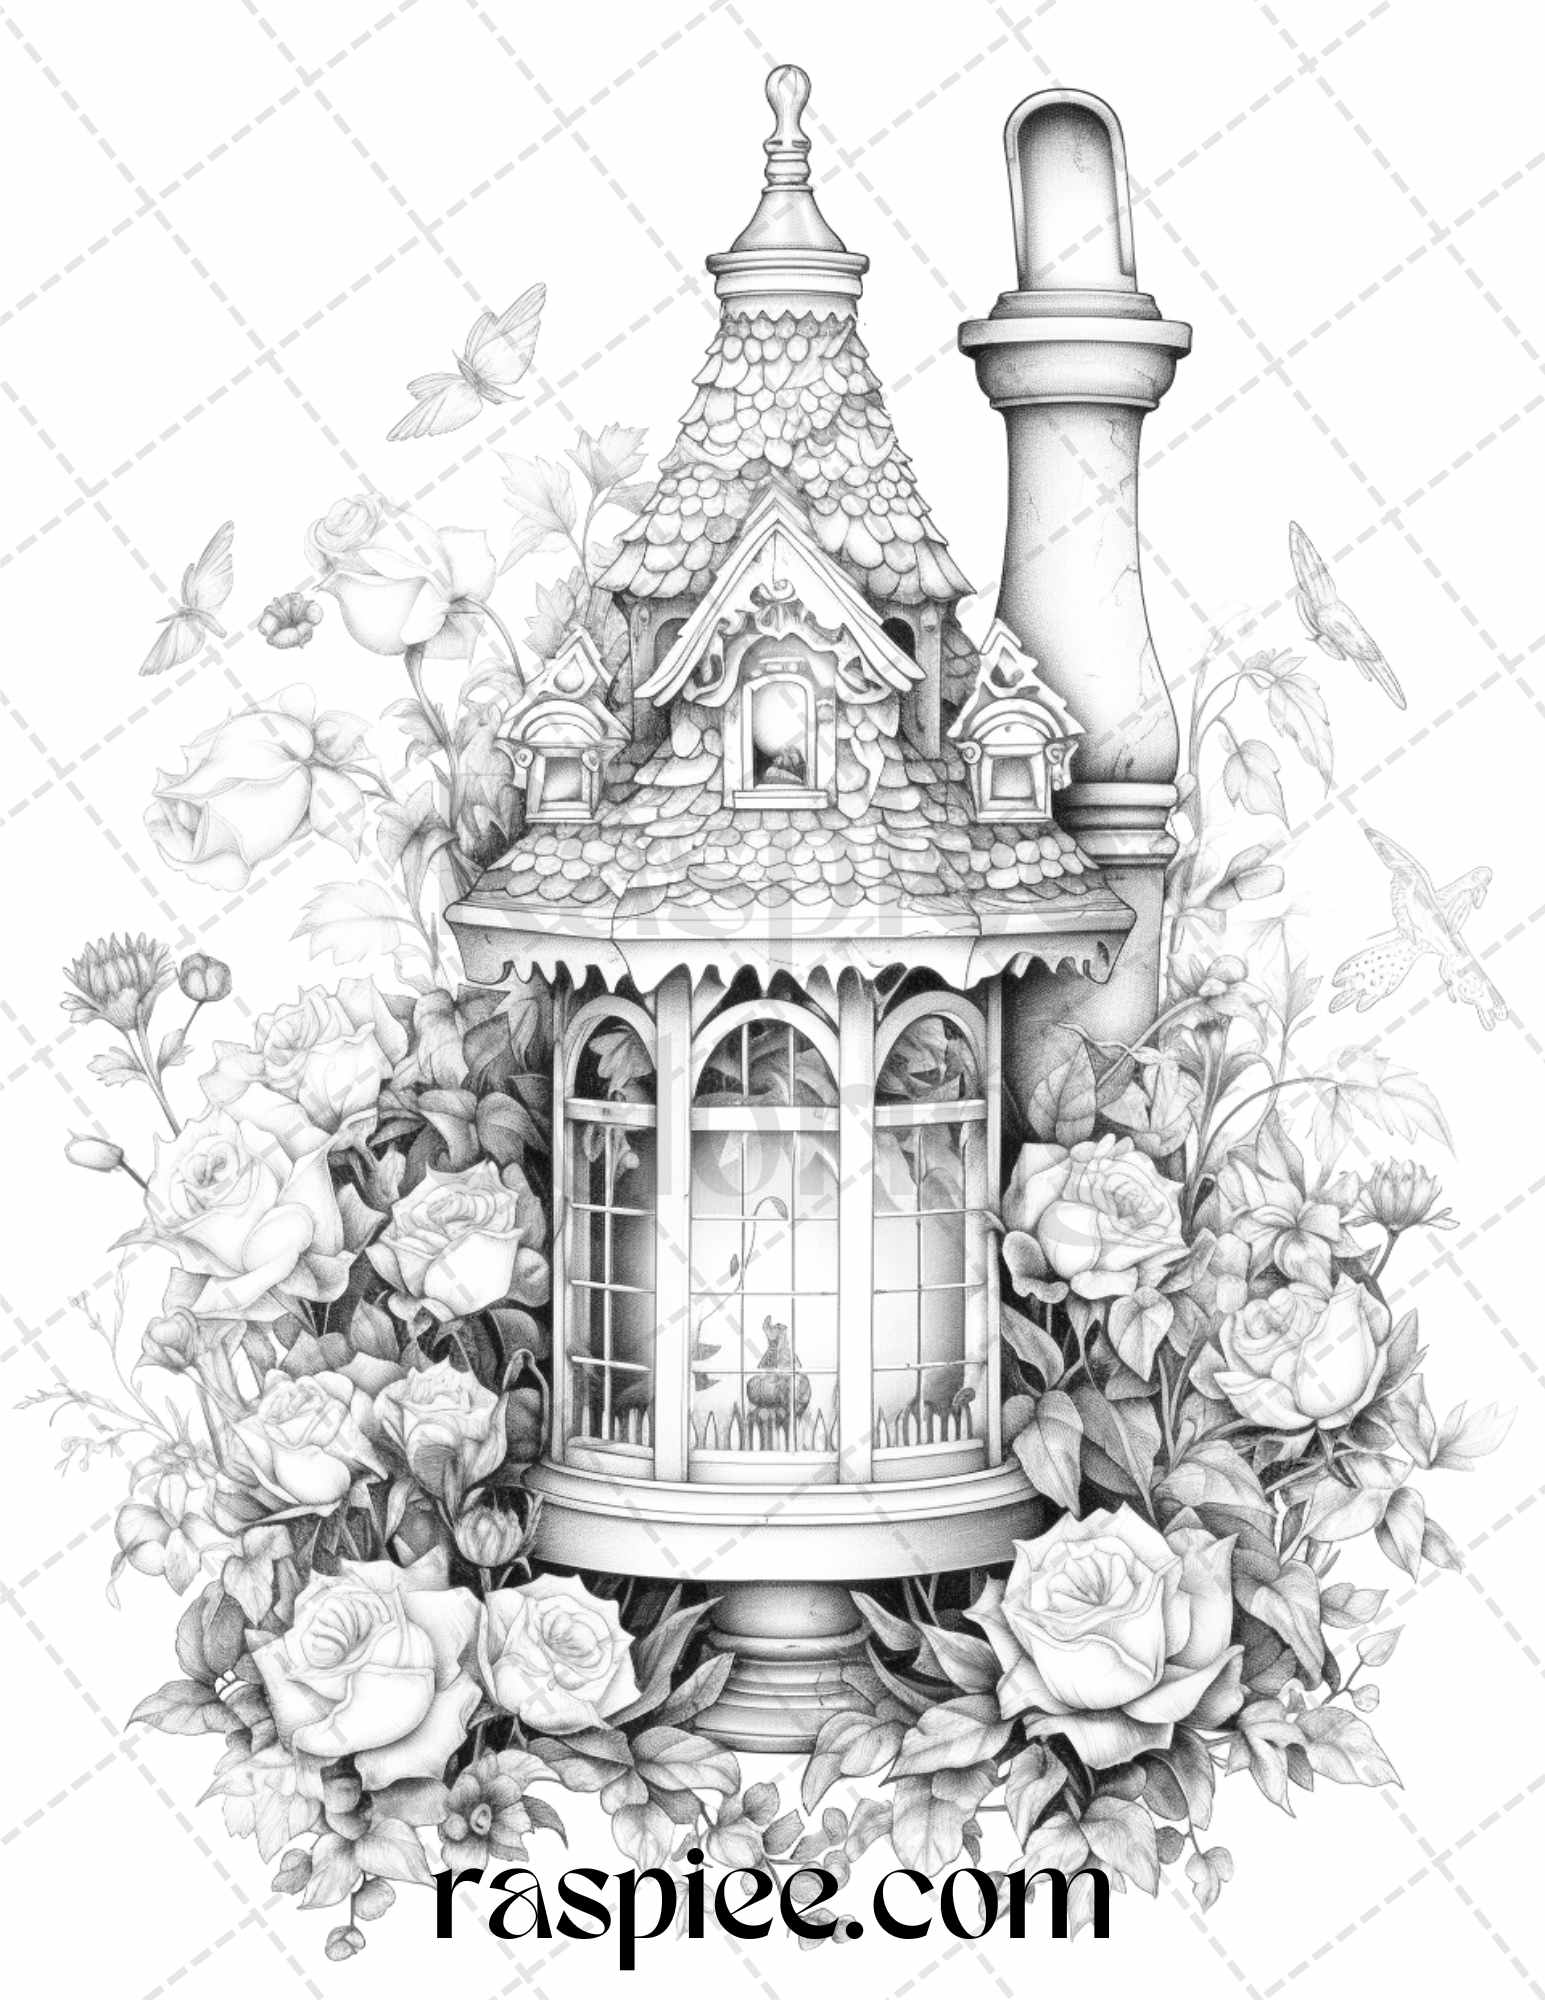 lantern fairy houses grayscale coloring pages, printable coloring pages for adults, grayscale art, fairy house coloring, lantern coloring